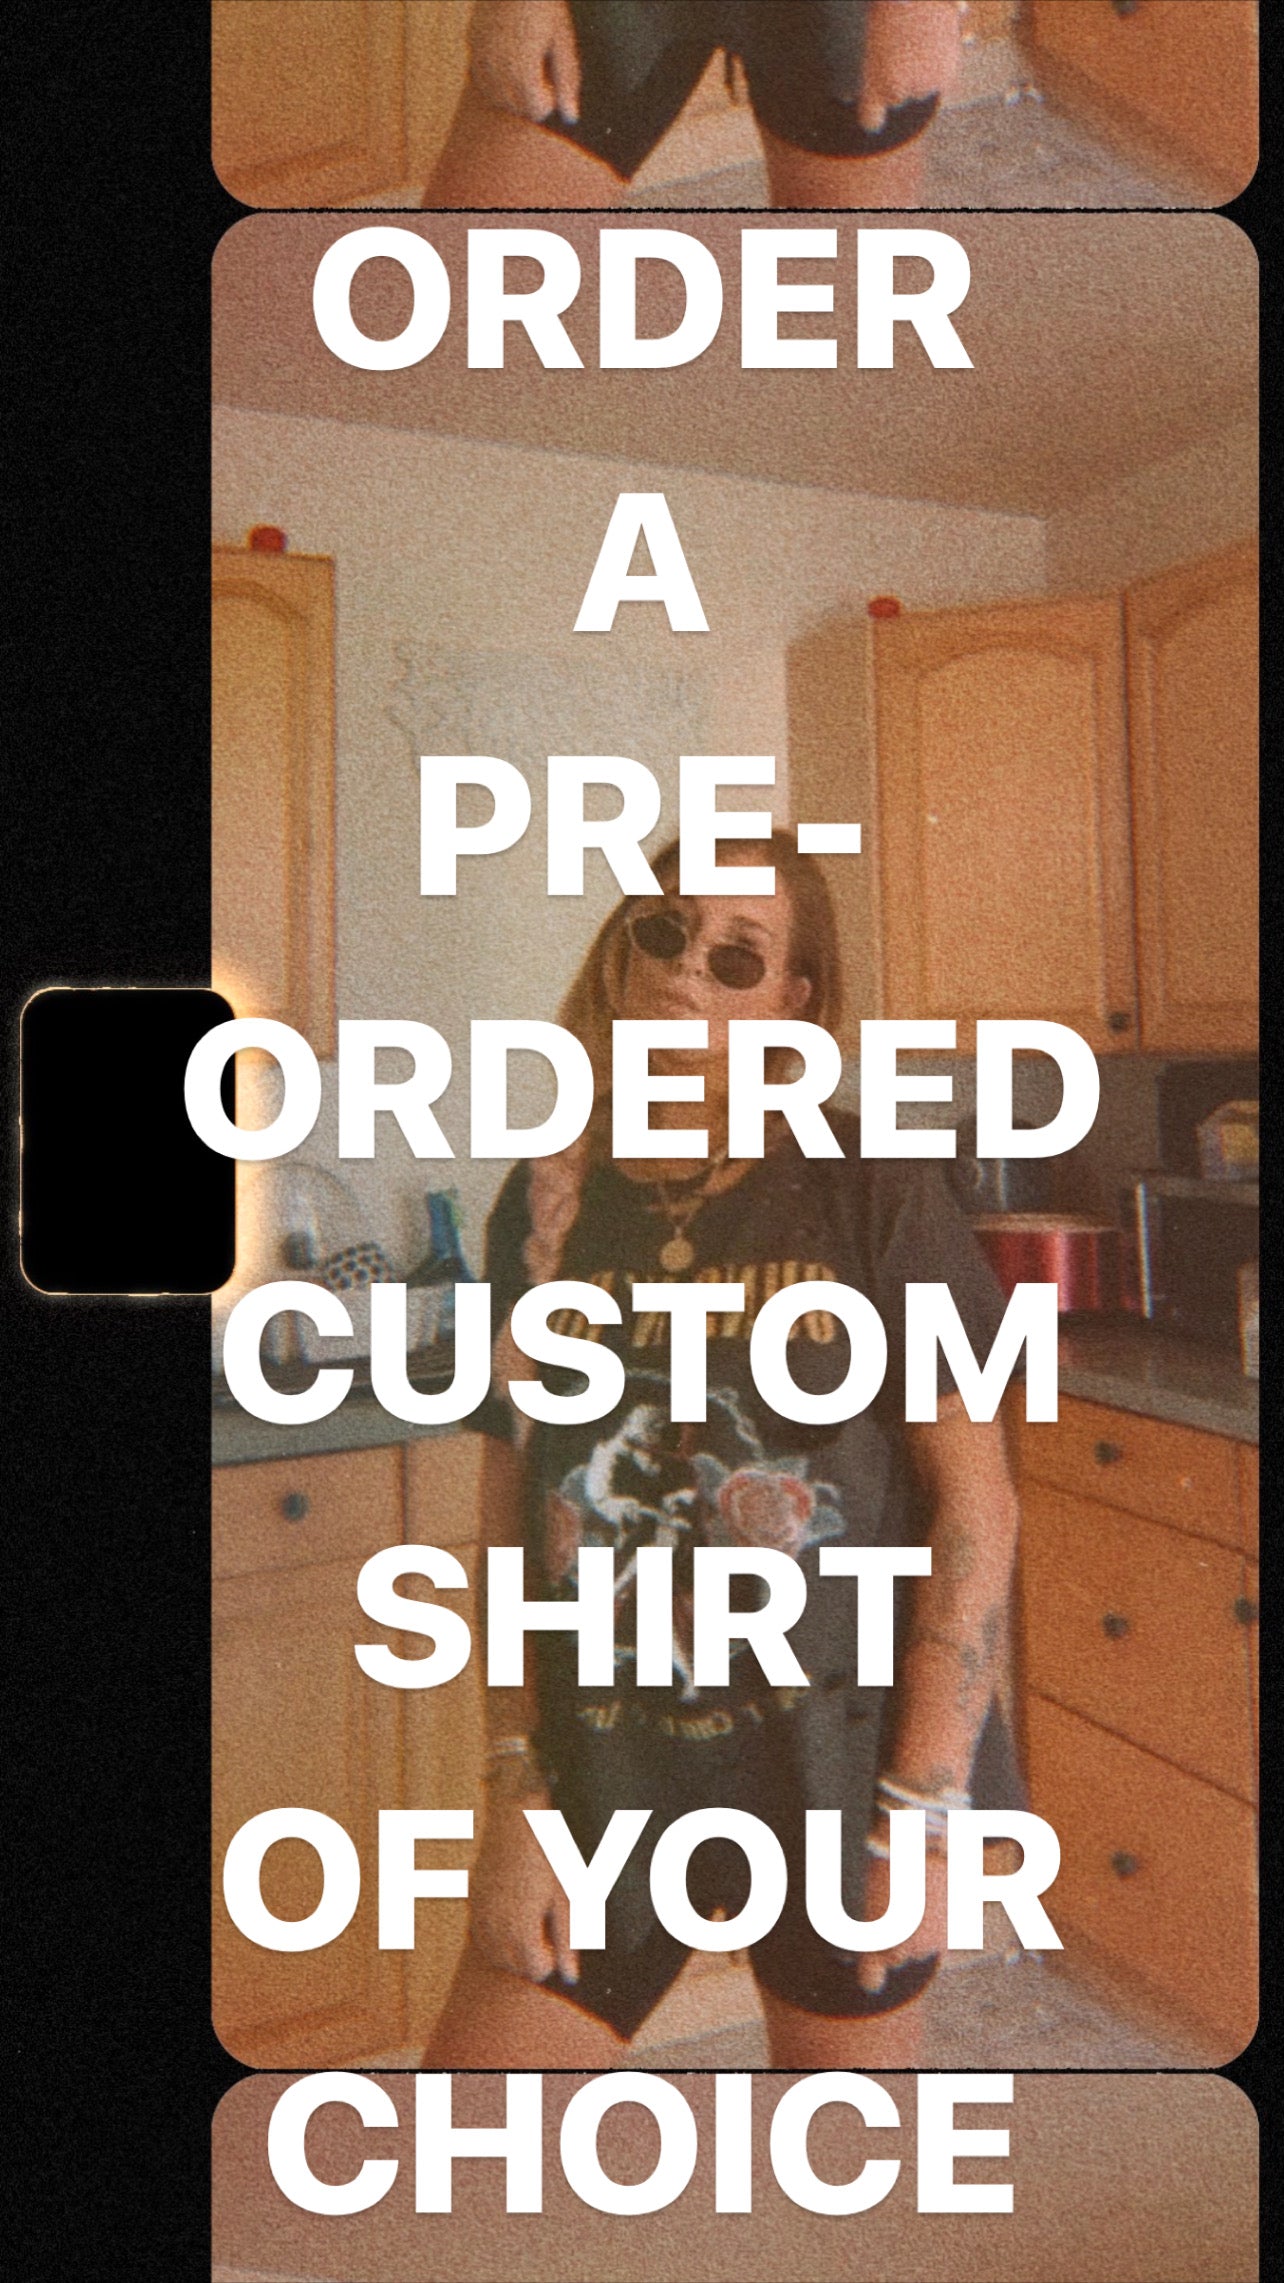 CUSTOM PRE-ORDERED SHIRT OF CHOICE (I WILL FIND) (long sleeve, sweatshirt, flannel, any type of shirt or tee)